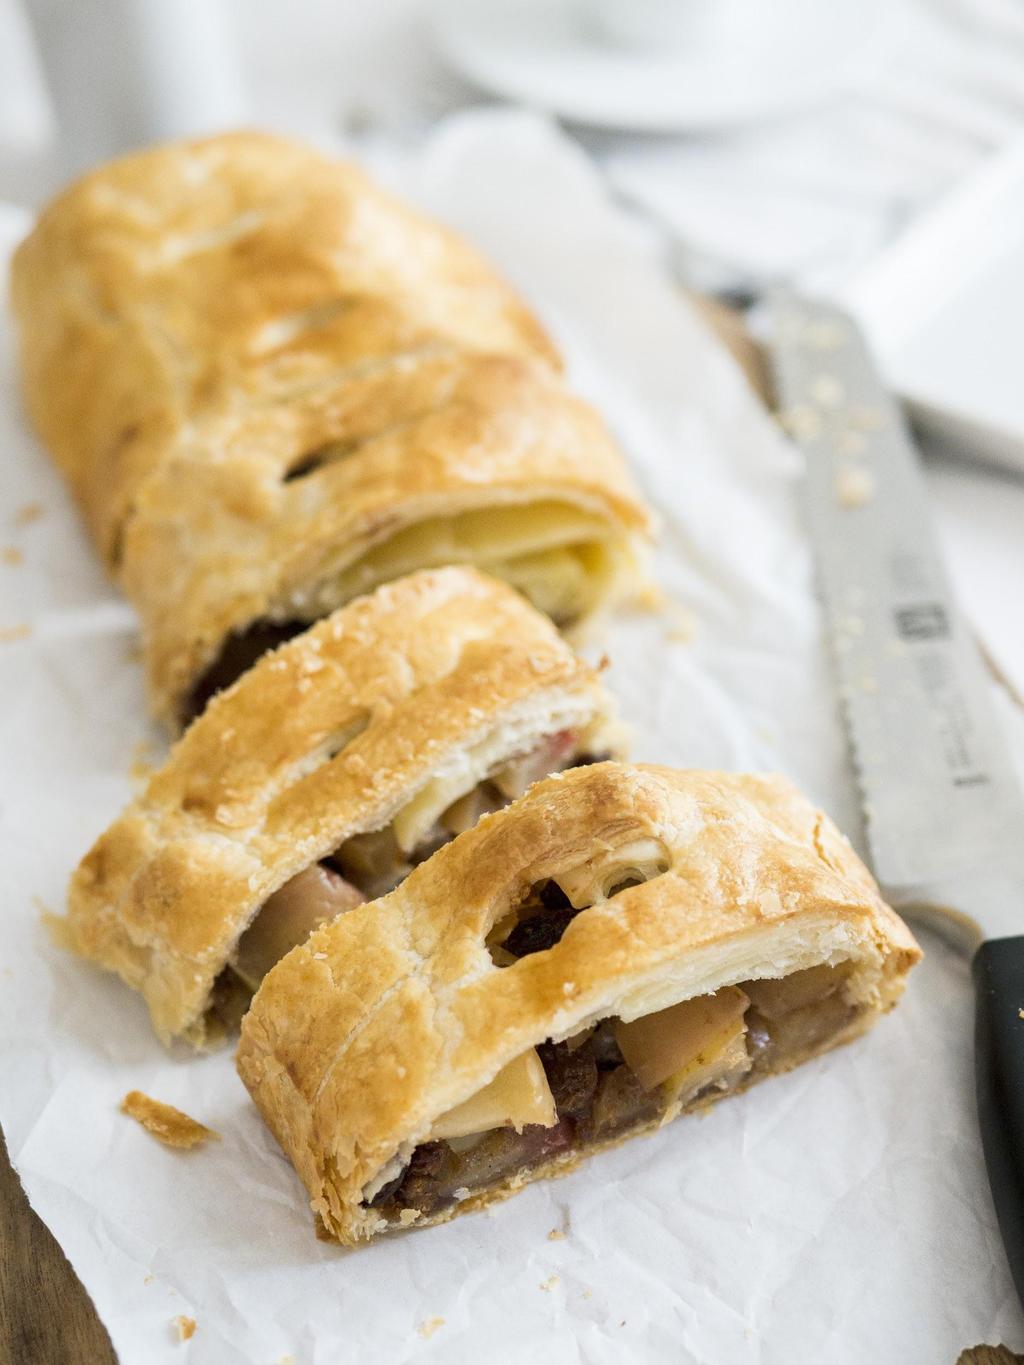 Serves 8 Prep time 0 min Baking time 0 min Easy Apple Strudel / cup raisins medium apples / cup + tsp sugar / tsp vanilla extract / cup walnuts, coarsely chopped / cup graham cracker crumbs This Puff